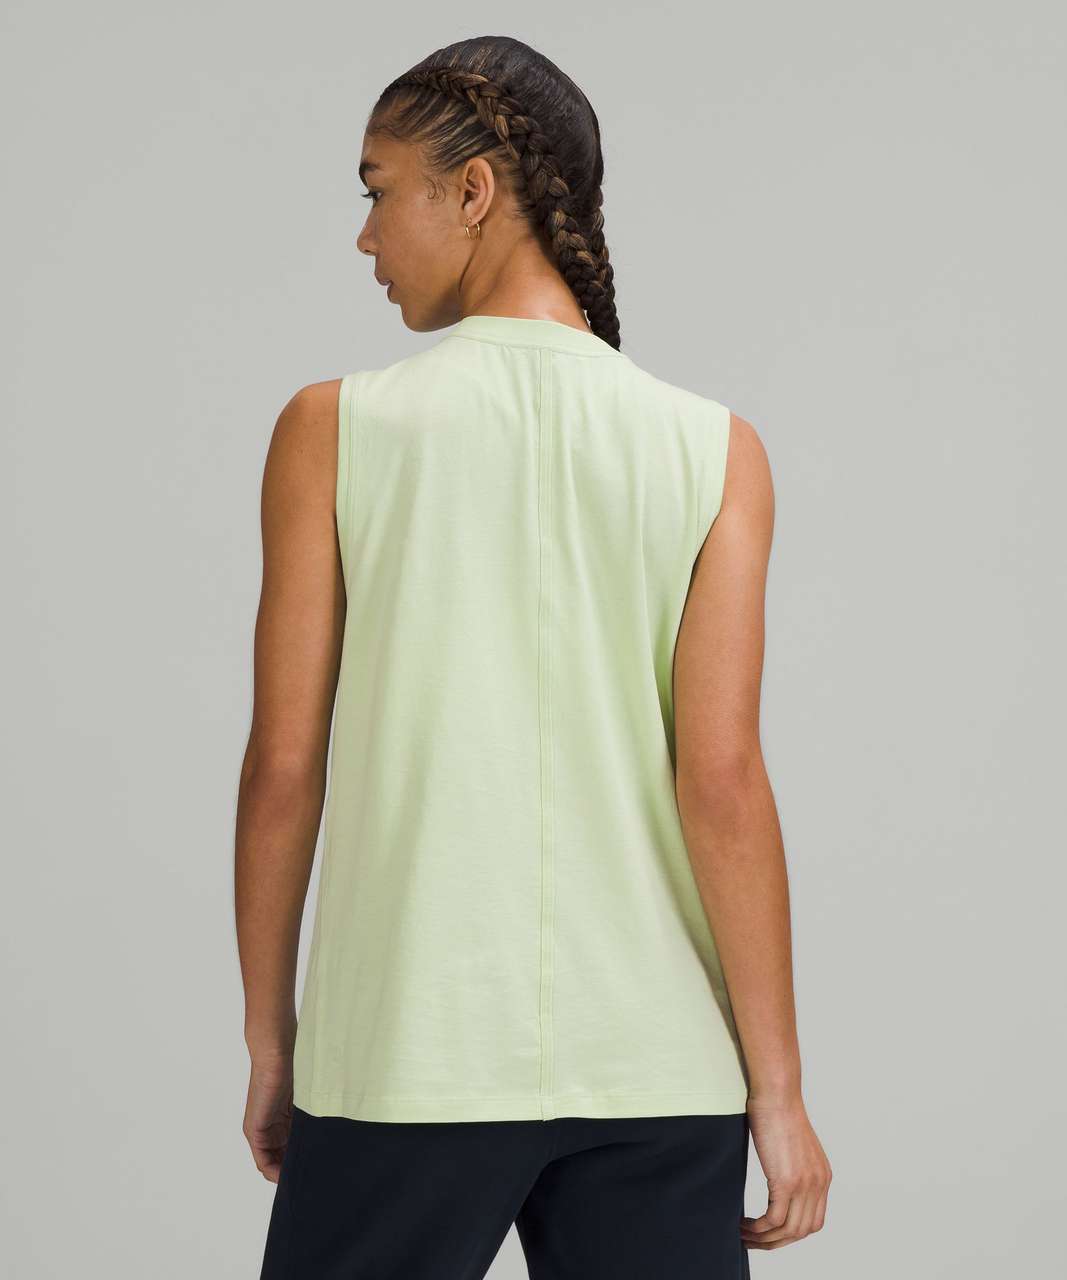 Lululemon Size 6 All Yours Tank Top Creamy Mint CRMM India